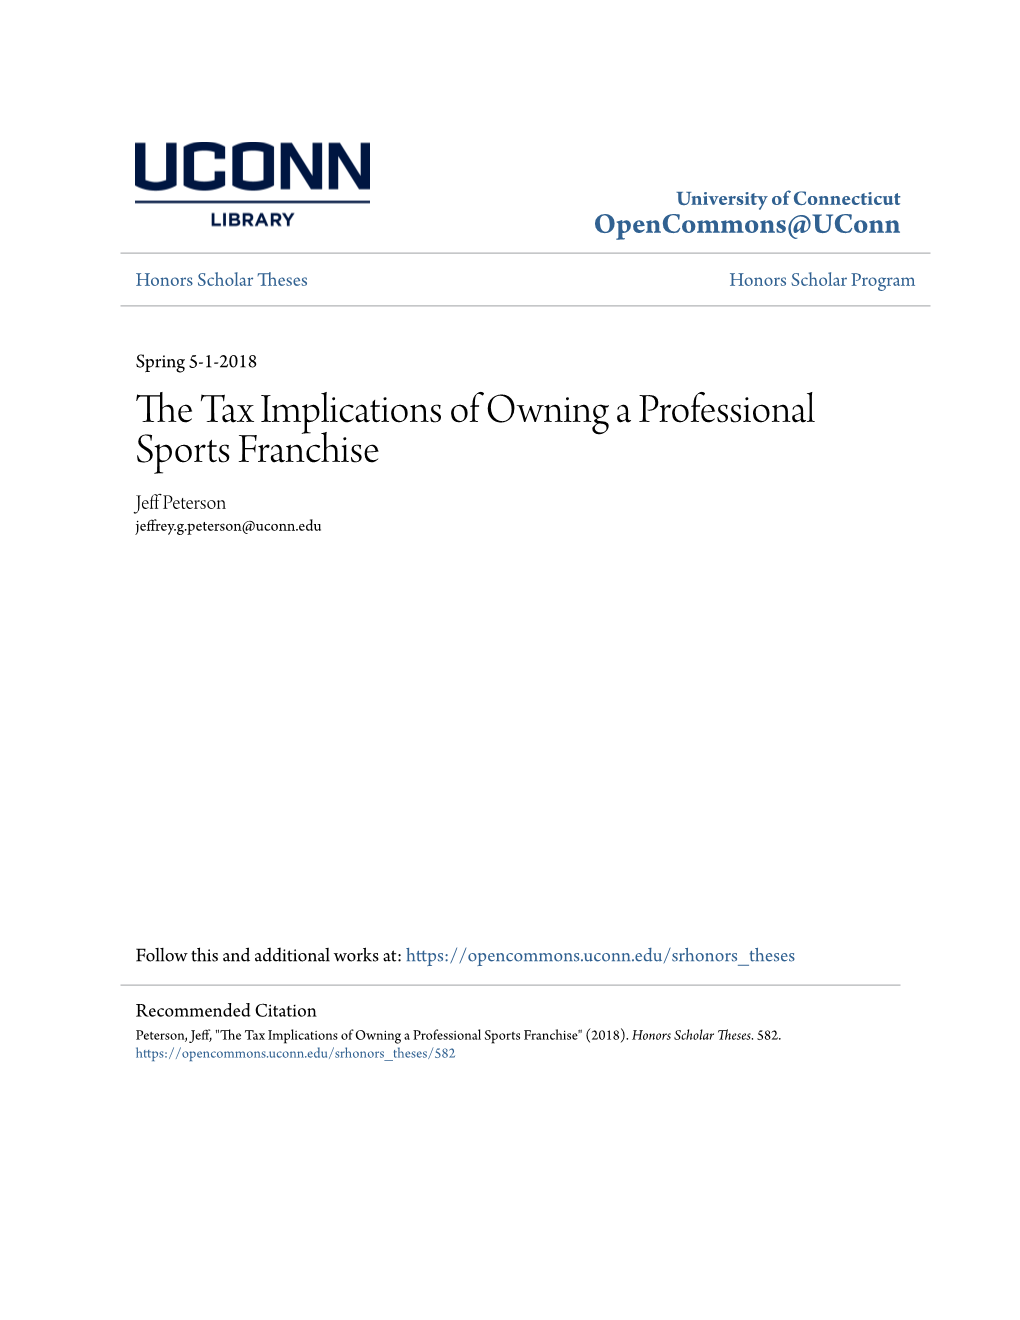 The Tax Implications of Owning a Professional Sports Franchise